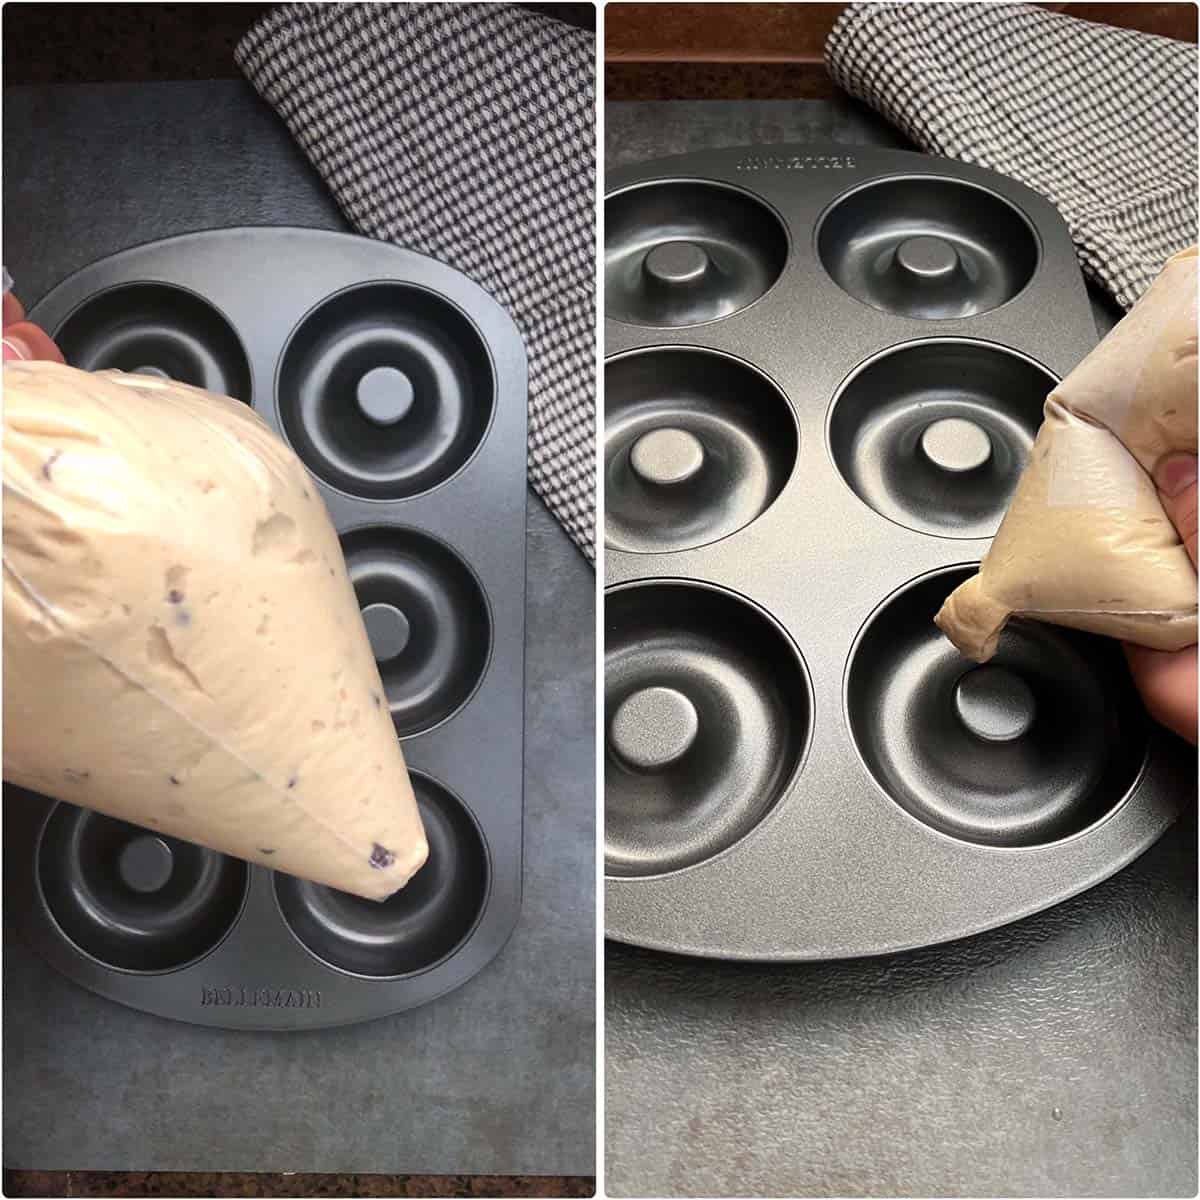 2 panel photo showing the piping of batter into a donut pan.